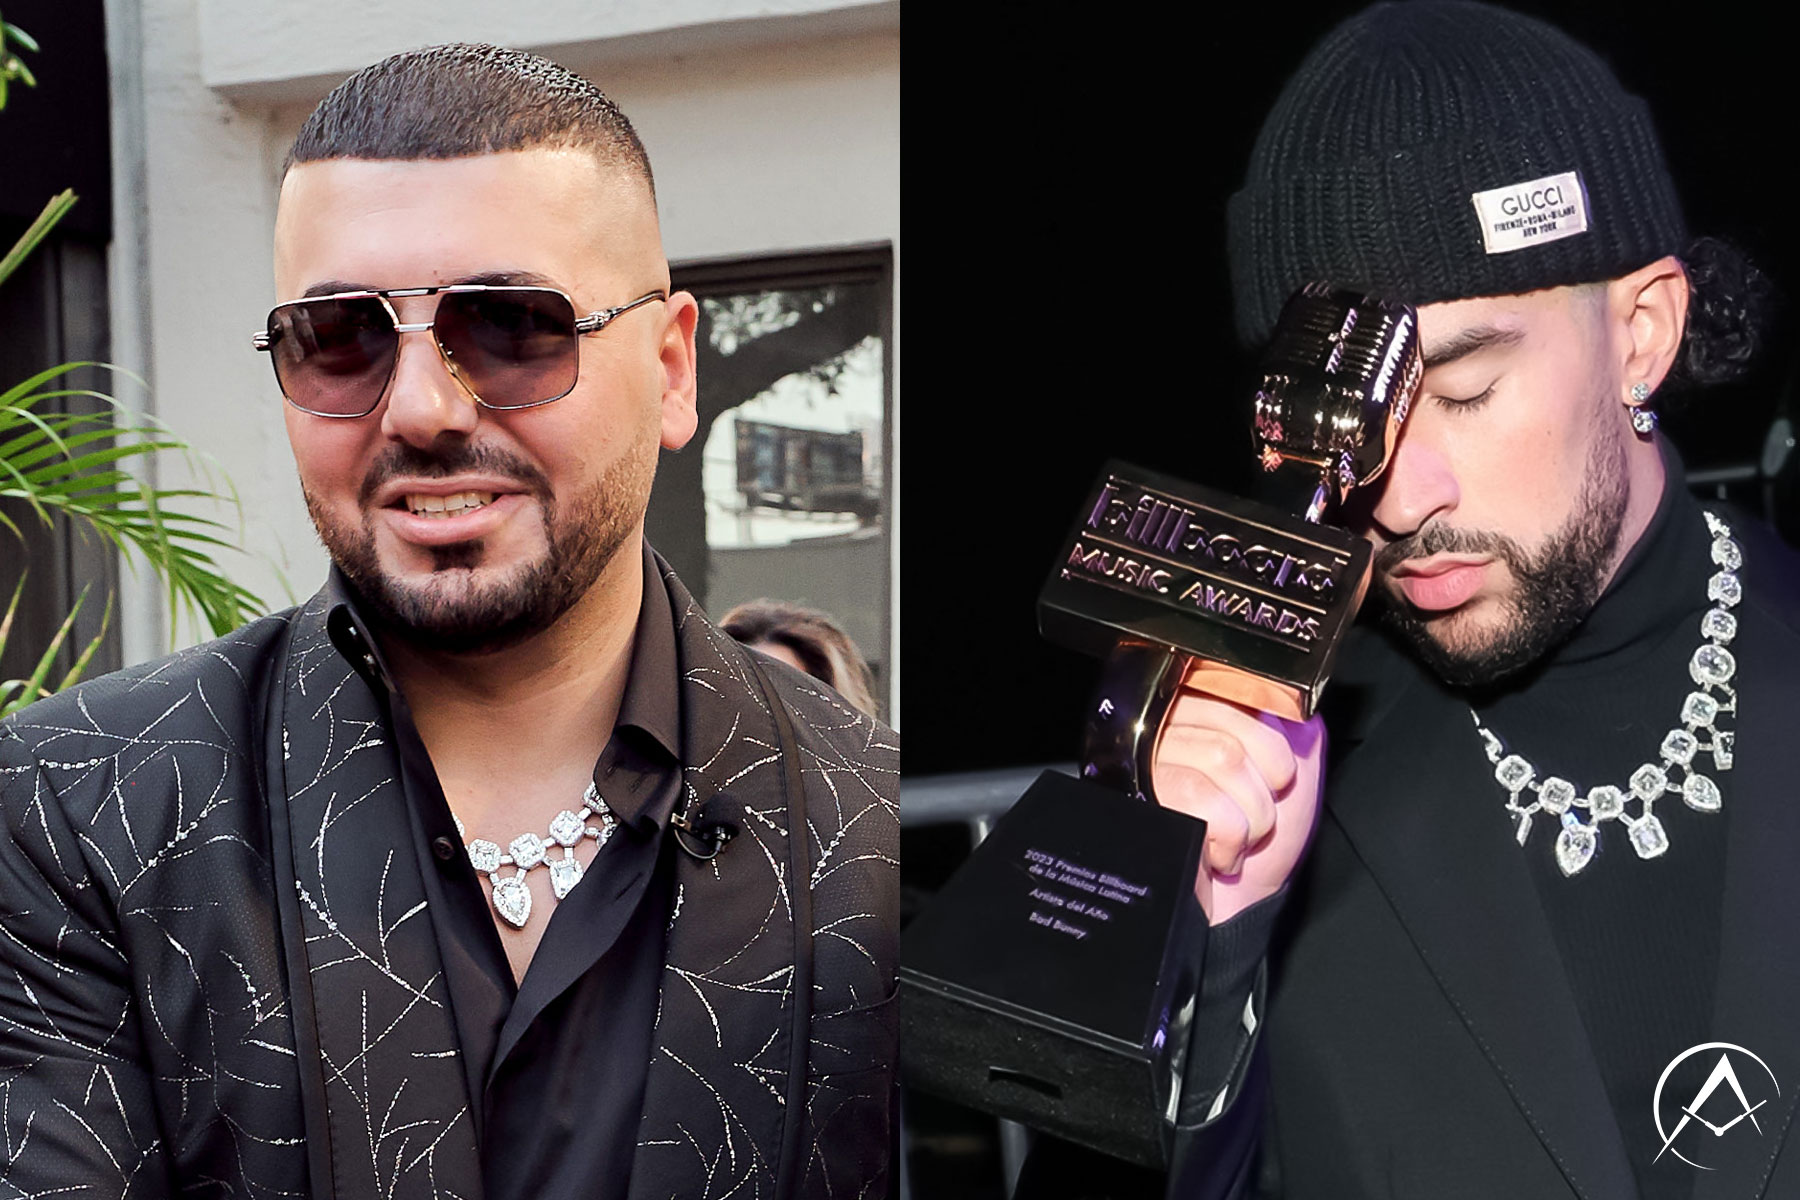 On Left: Man Wearing Black Suit with Sunglasses and Diamond-Pave Crown Chain in Miami’s Design District. On Right: Man Wearing Black Turtleneck with Black Suit Jacket, Black Beanie, and Diamond-Pave Crown Chain Holding a Billboard Music Award for Best Art